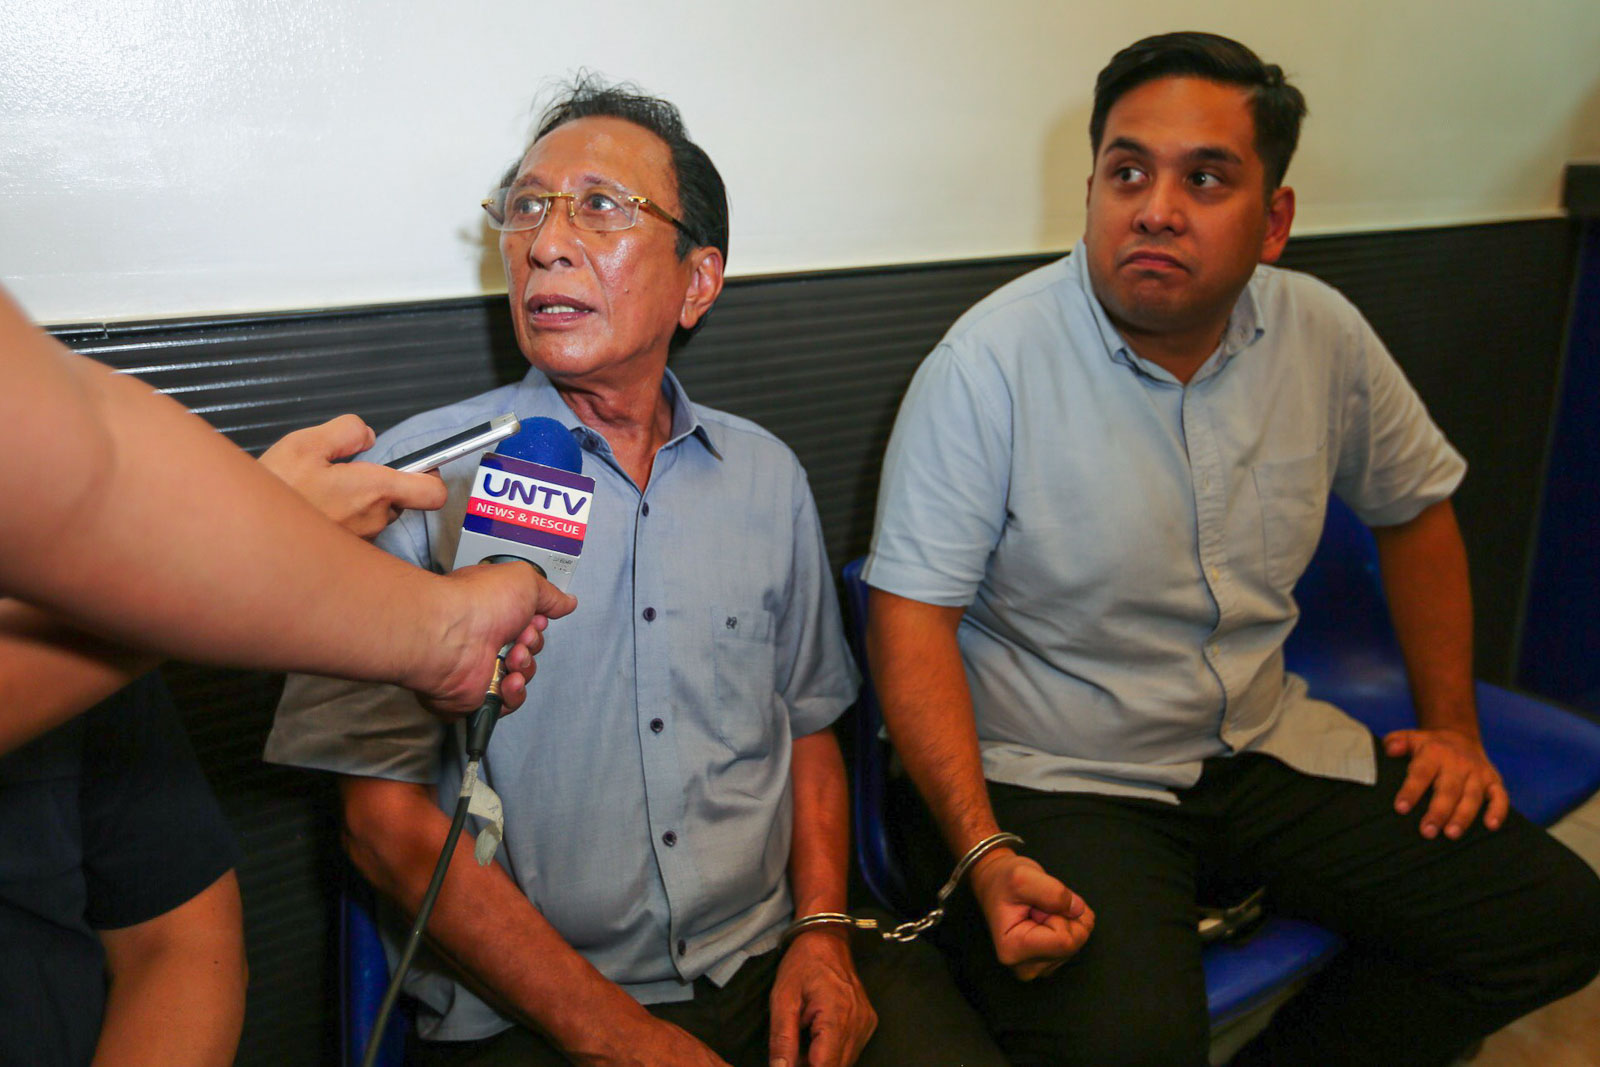 ARRESTED. Quezon City mayoral candidate Bingbong Crisologo is arrested and brought to Camp Karingal on May 12, 2019, after he supposedly obstructed justice by preventing police from arresting his staff for alleged vote buying. Photo by Jire Carreon/Rappler 